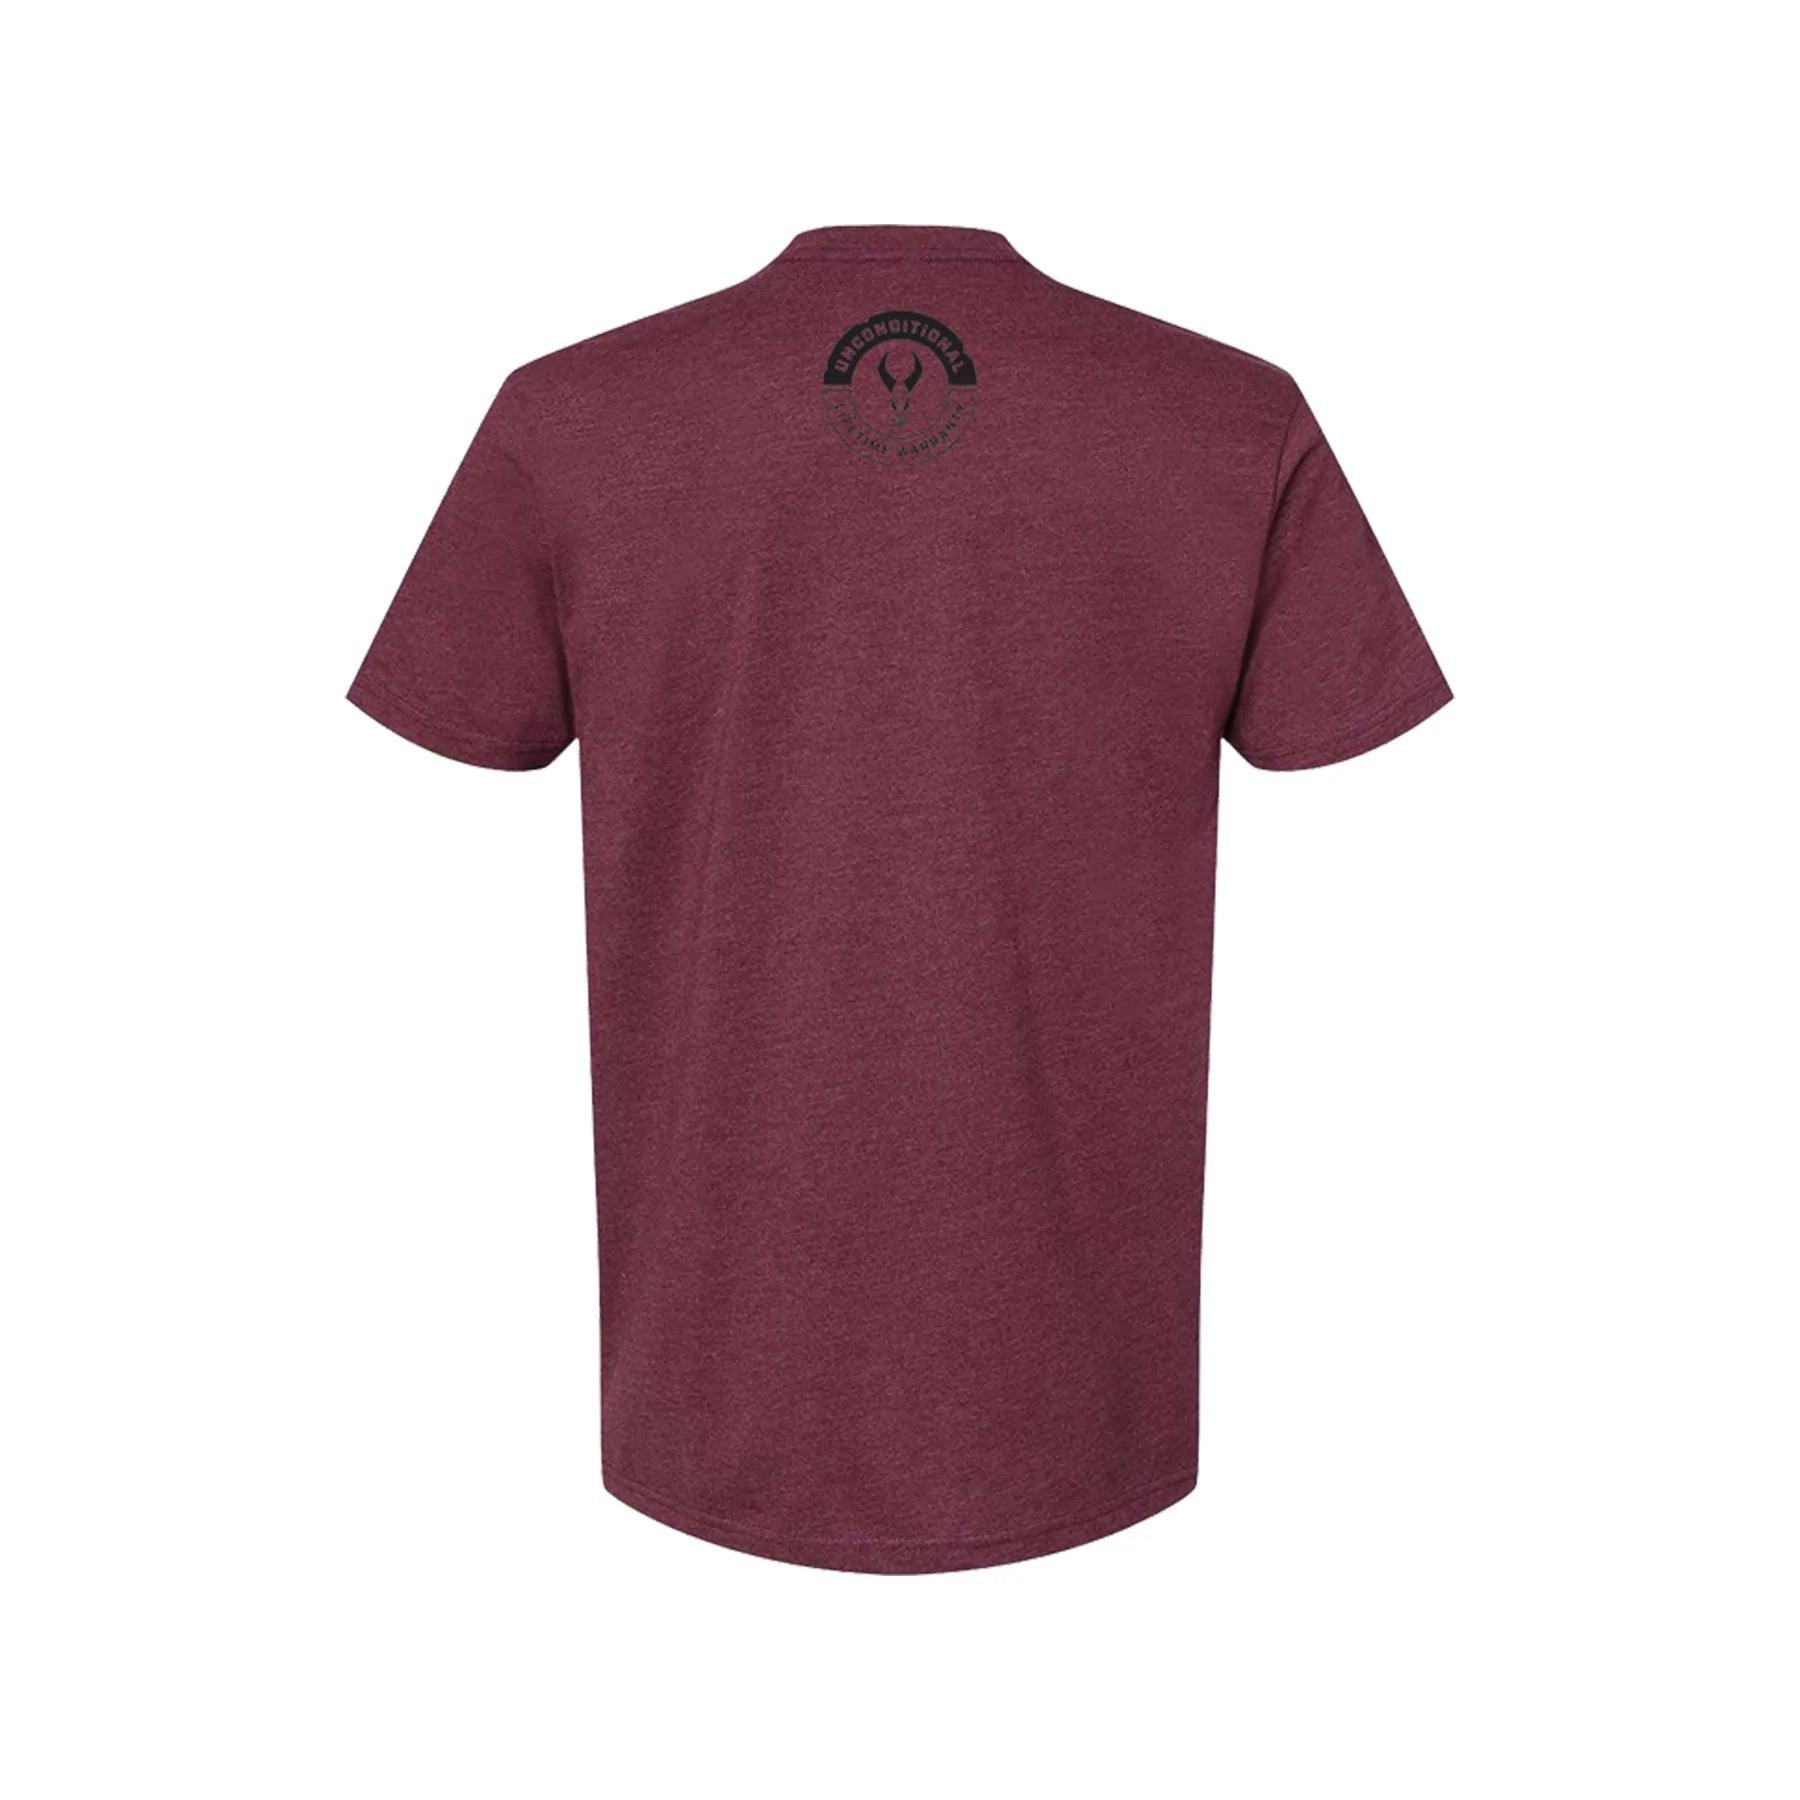 Badlands Topo Skull Tee - Leapfrog Outdoor Sports and Apparel